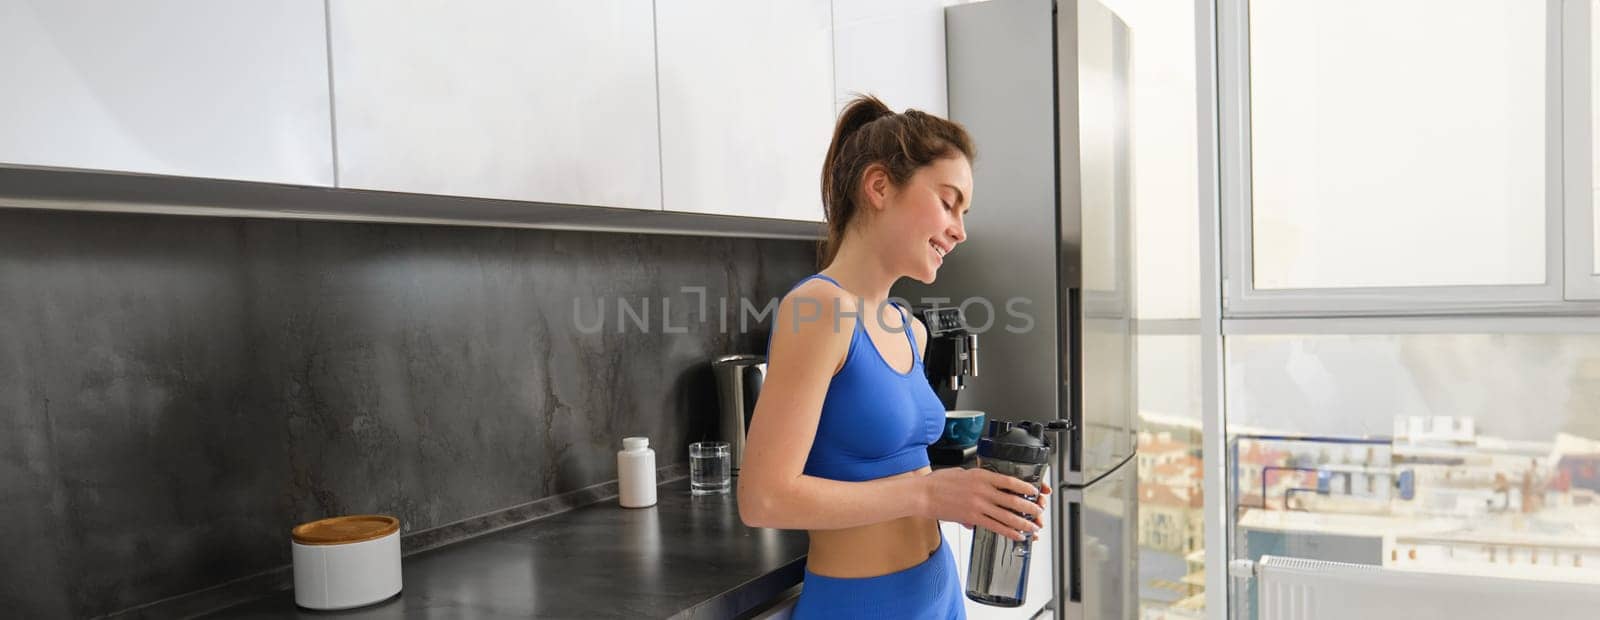 Image of young fitness instructor, woman in sportsbra and leggings, holding water bottle, drinking after workout, standing in kitchen.